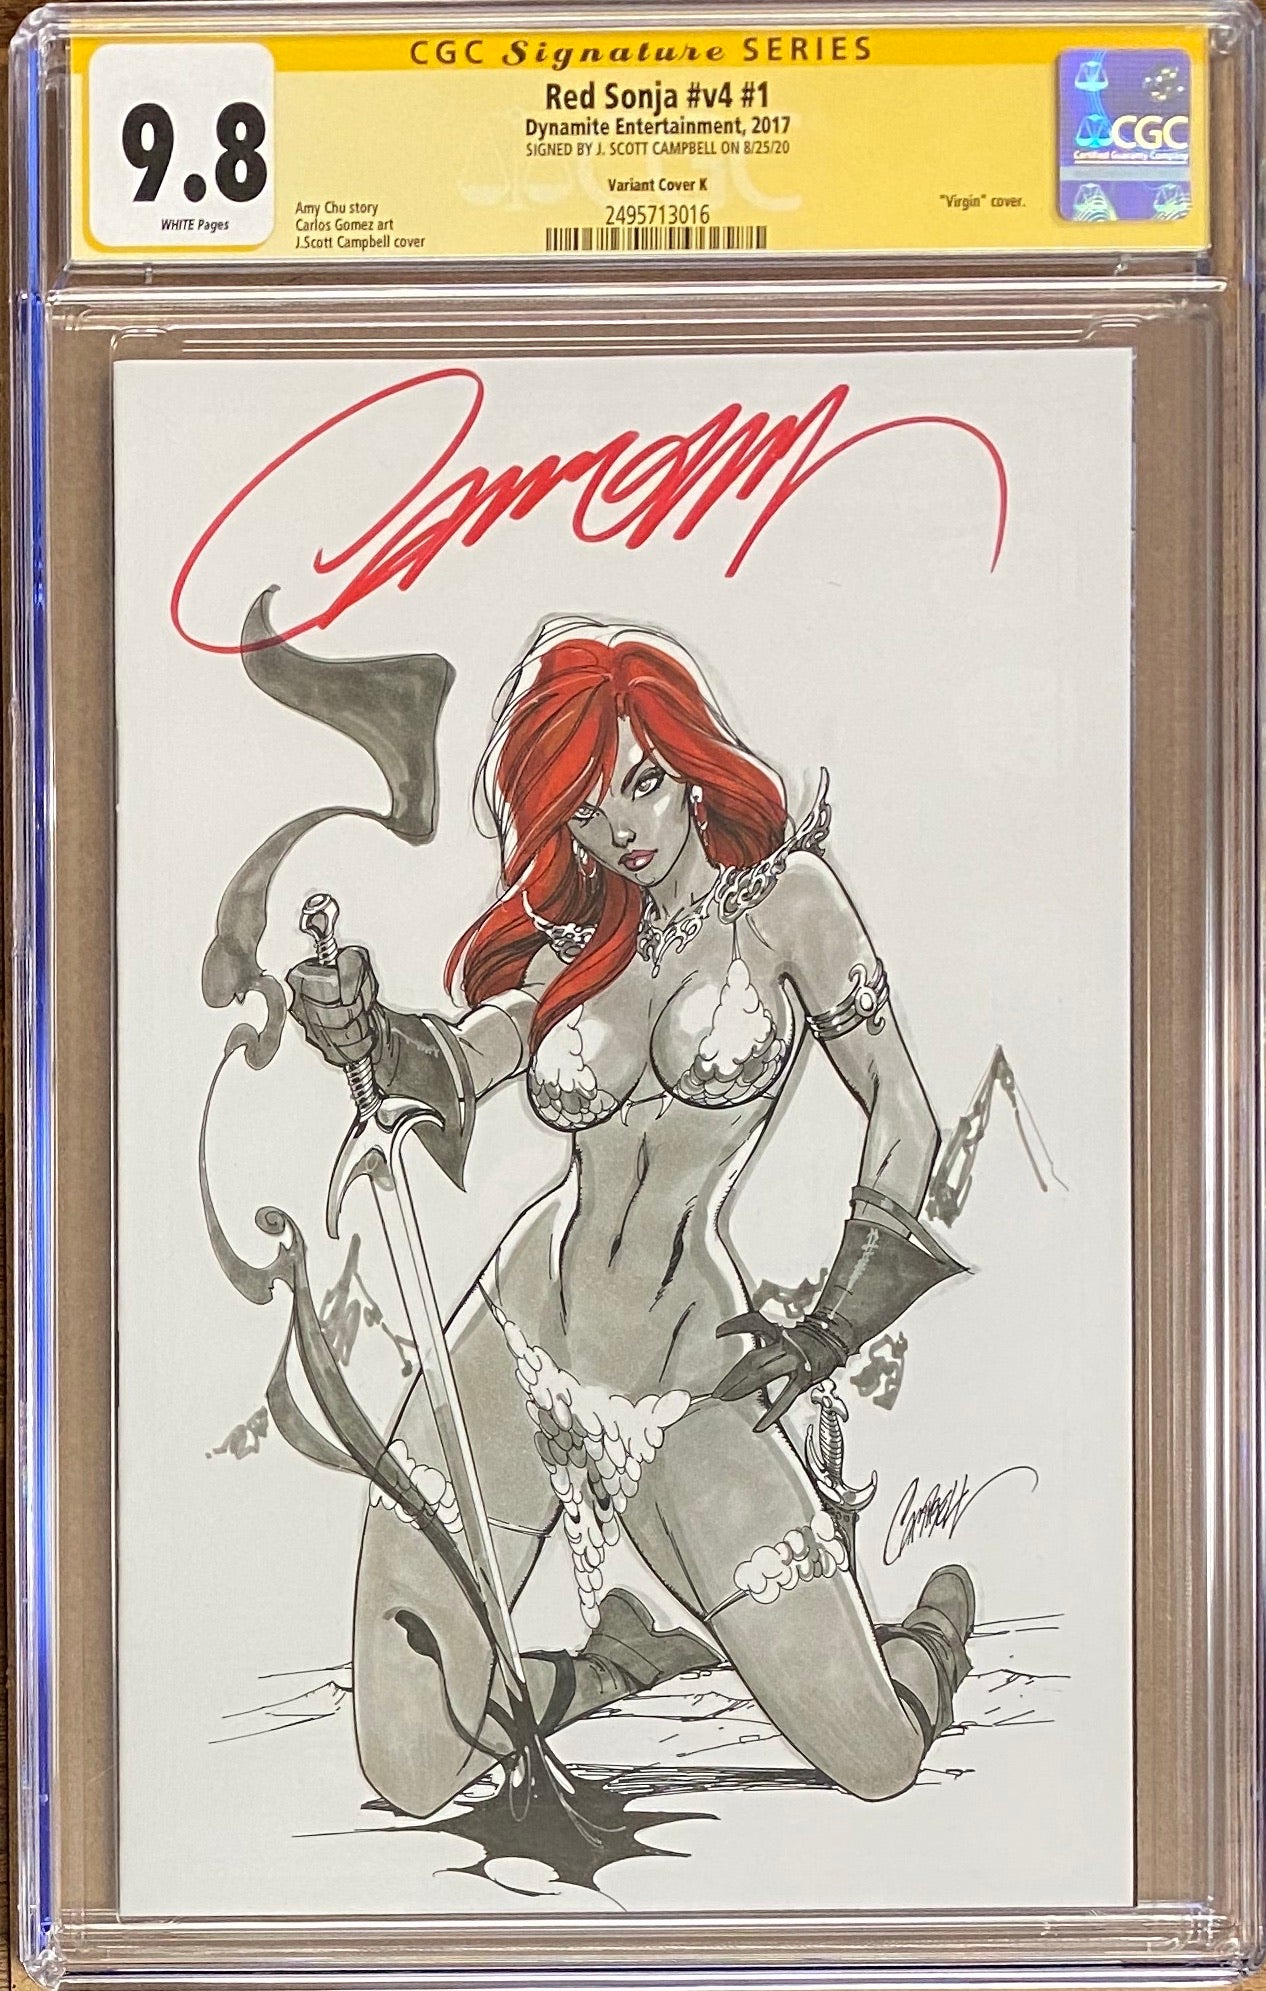 Red Sonja #1 J. Scott Campbell 1:50 Retailer Incentive Variant Cover K CGC 9.8 SS